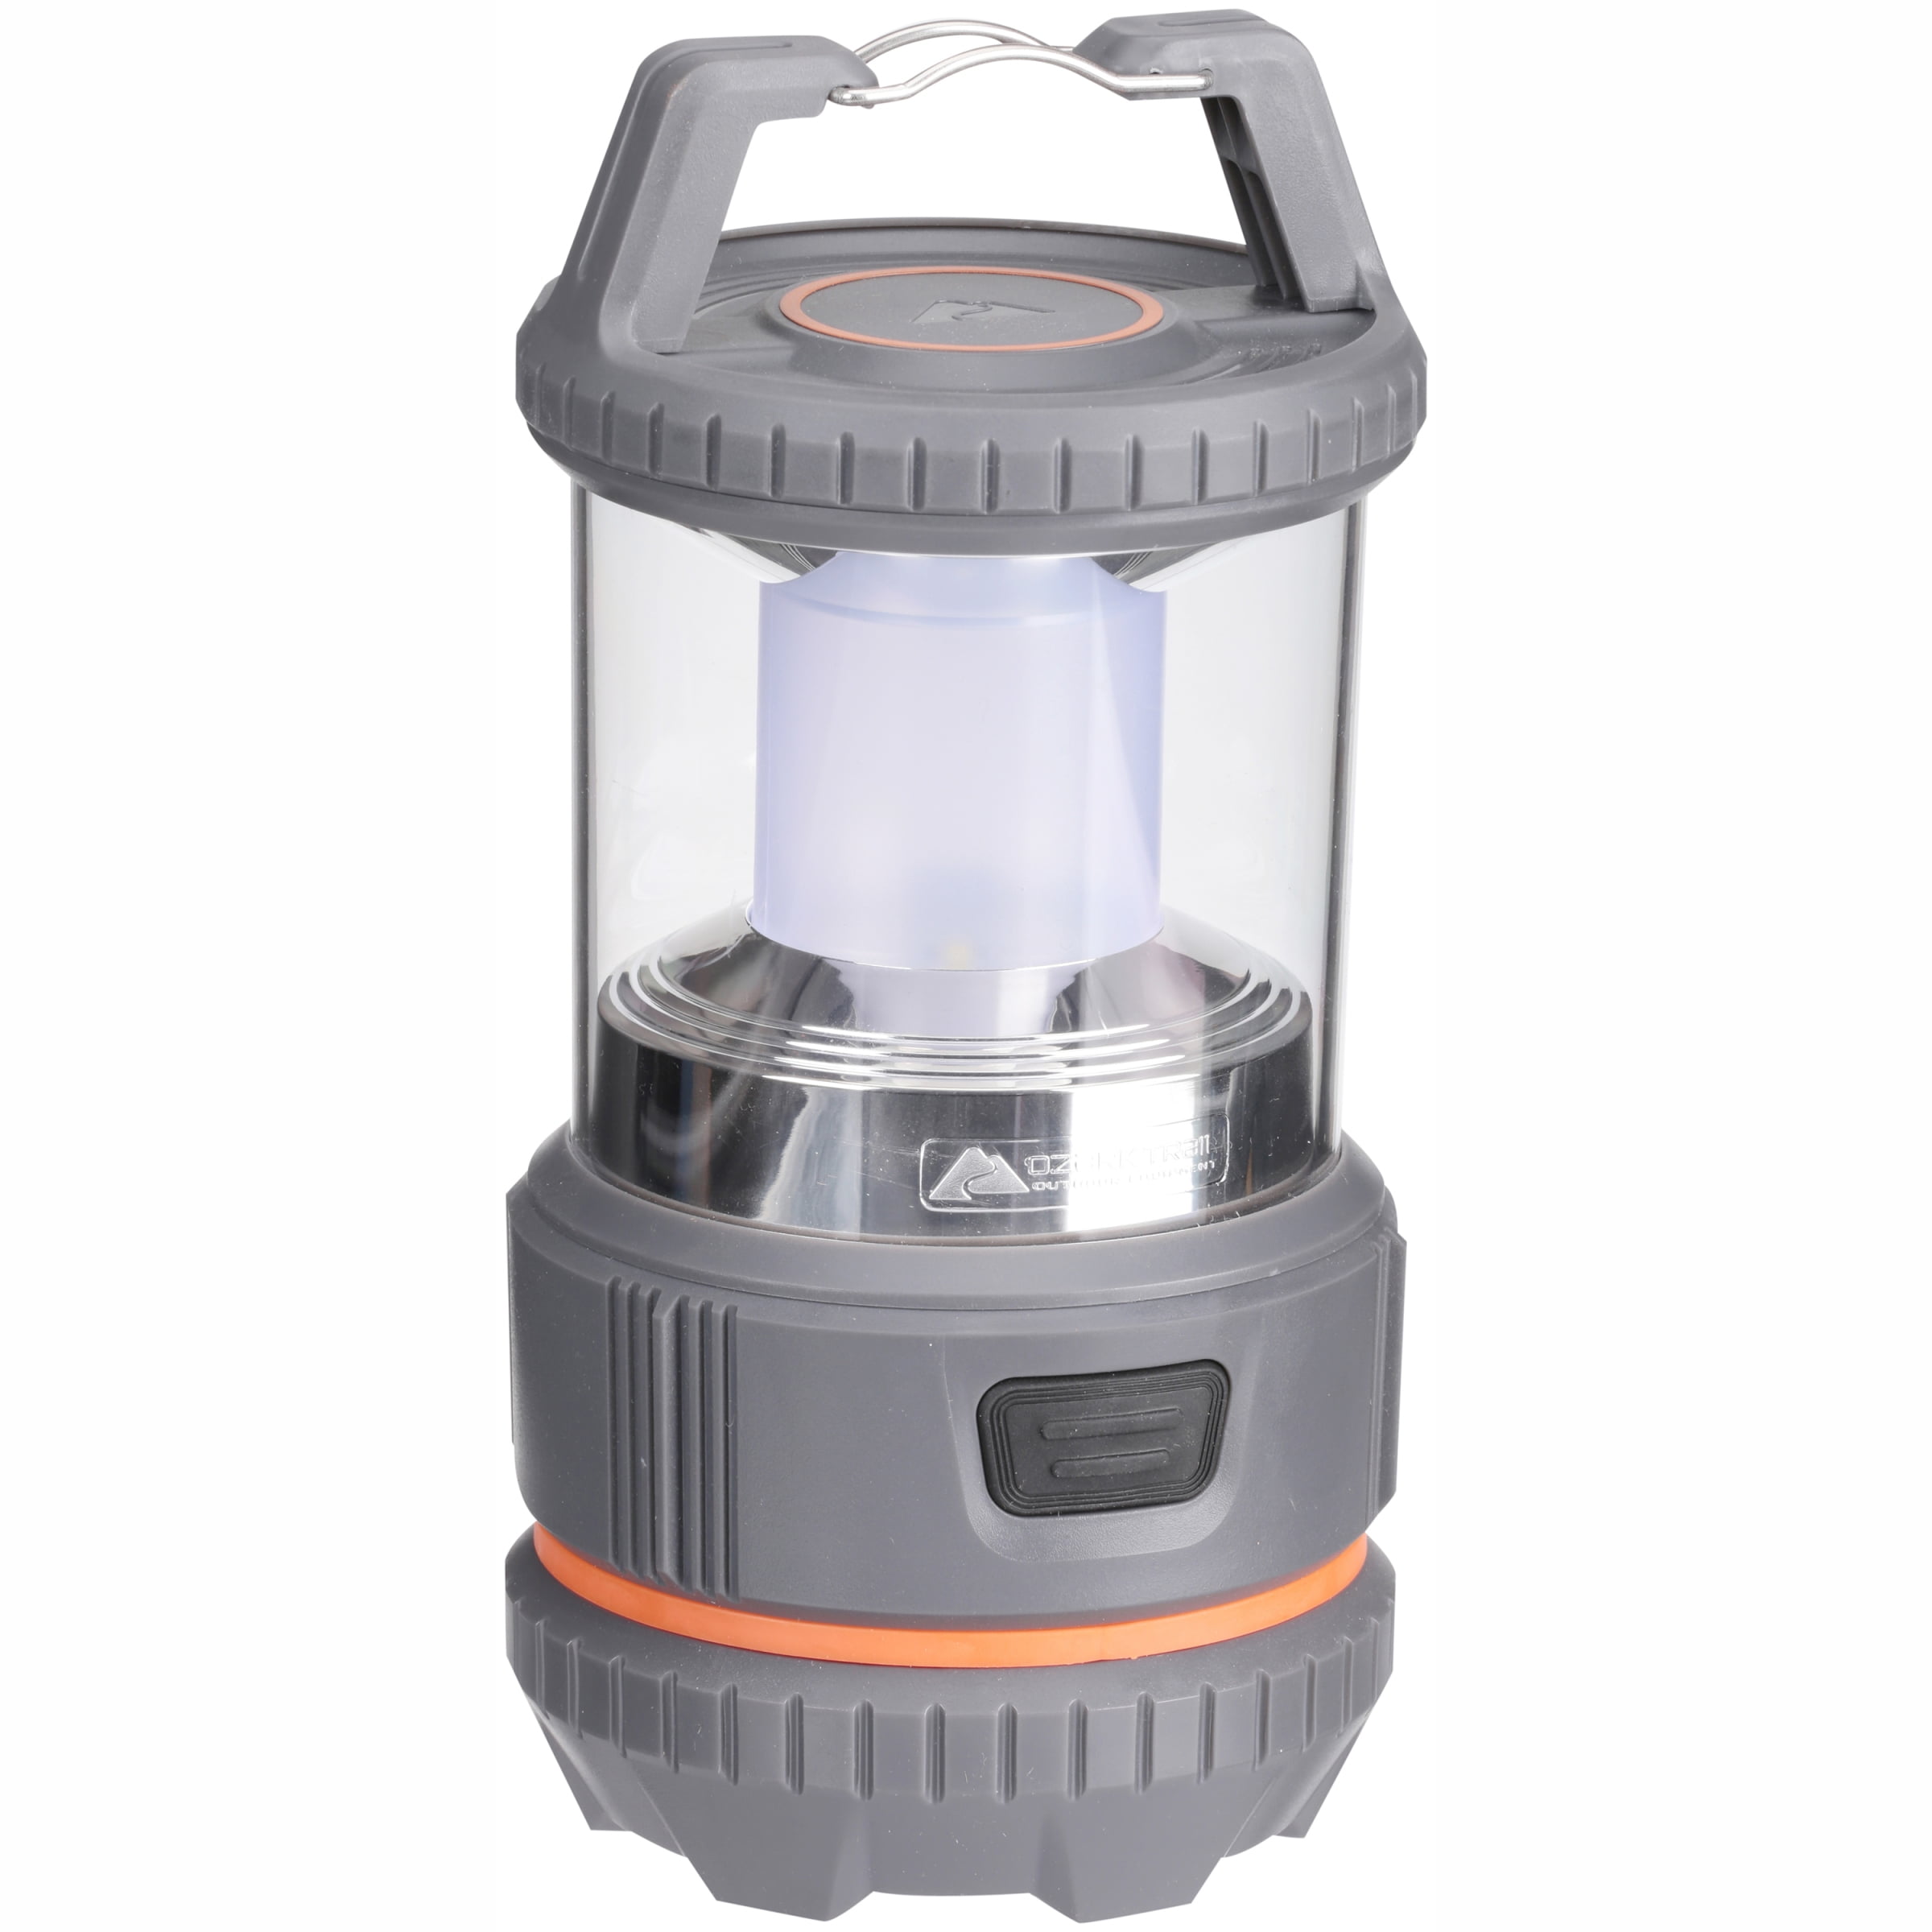 $75 AVALANCHE GREEN ULTRA BRIGHT LED LANTERN OUTDOOR CAMPING LAMP 300 LUMENS 